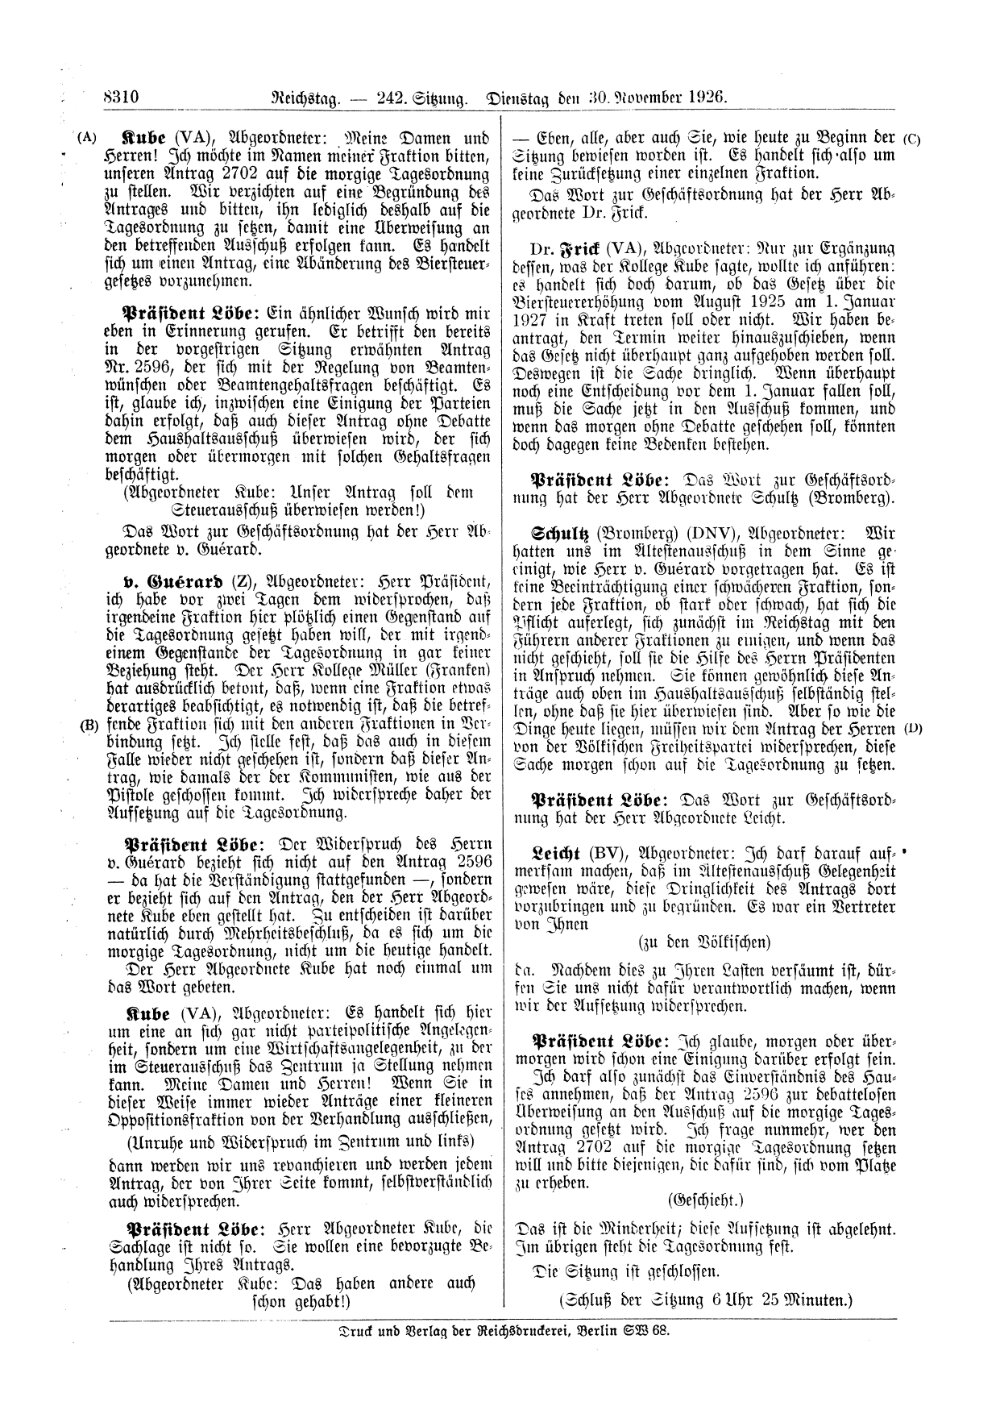 Scan of page 8310